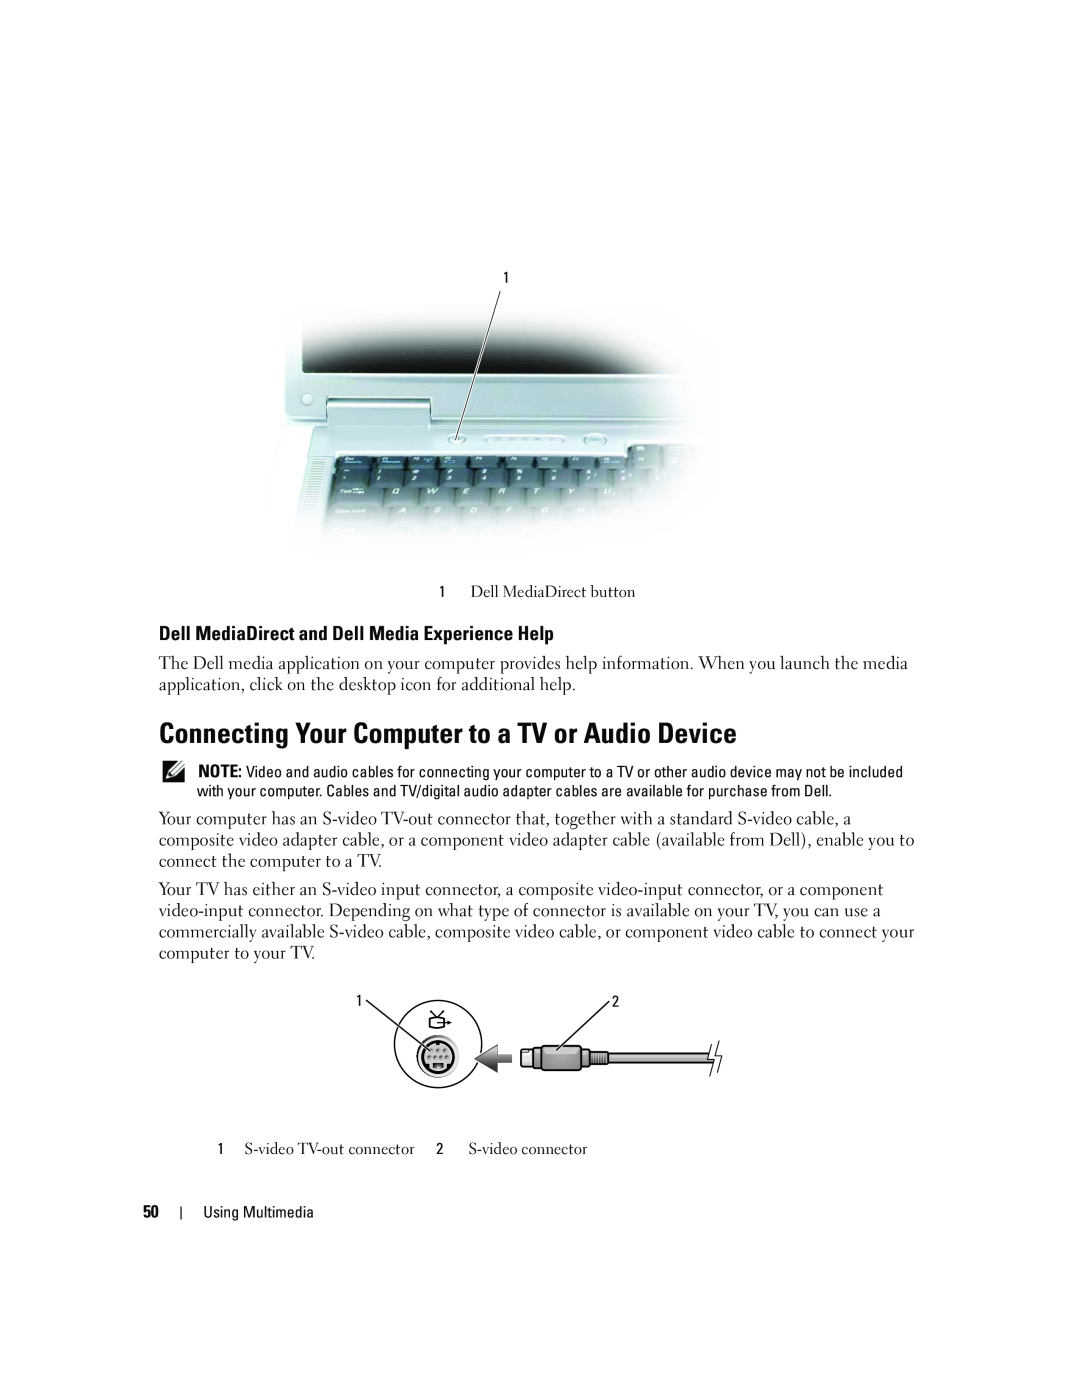 Dell PP20L owner manual Connecting Your Computer to a TV or Audio Device, Dell MediaDirect and Dell Media Experience Help 